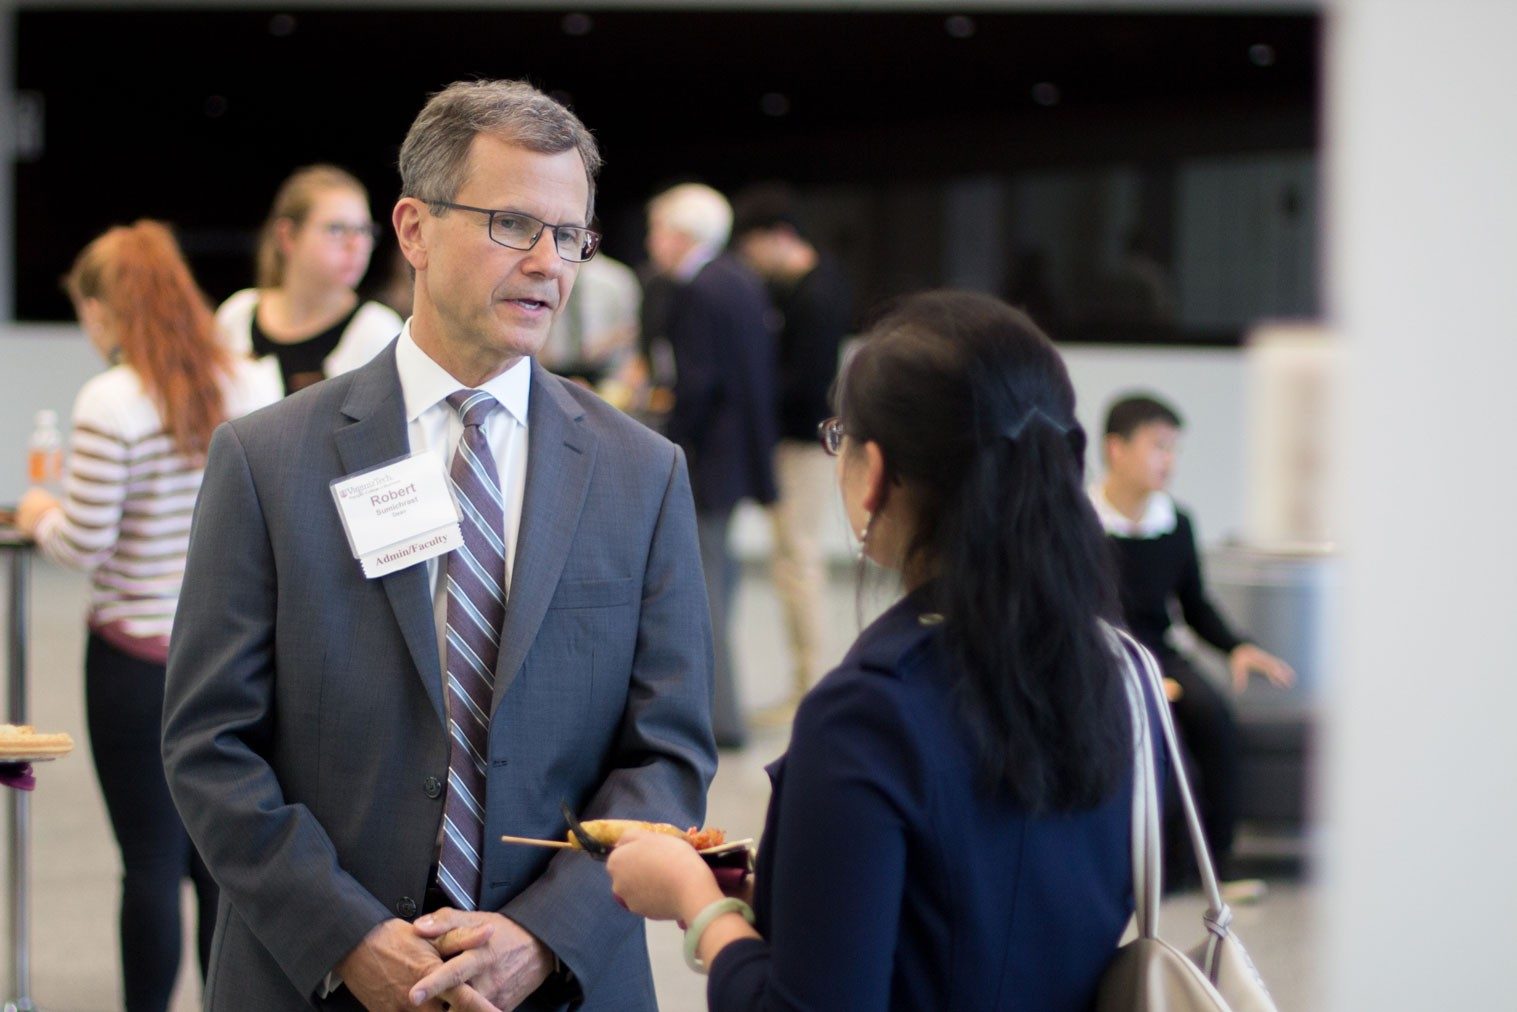 Dean Robert Sumichrast interacts with attendees at the international student reception